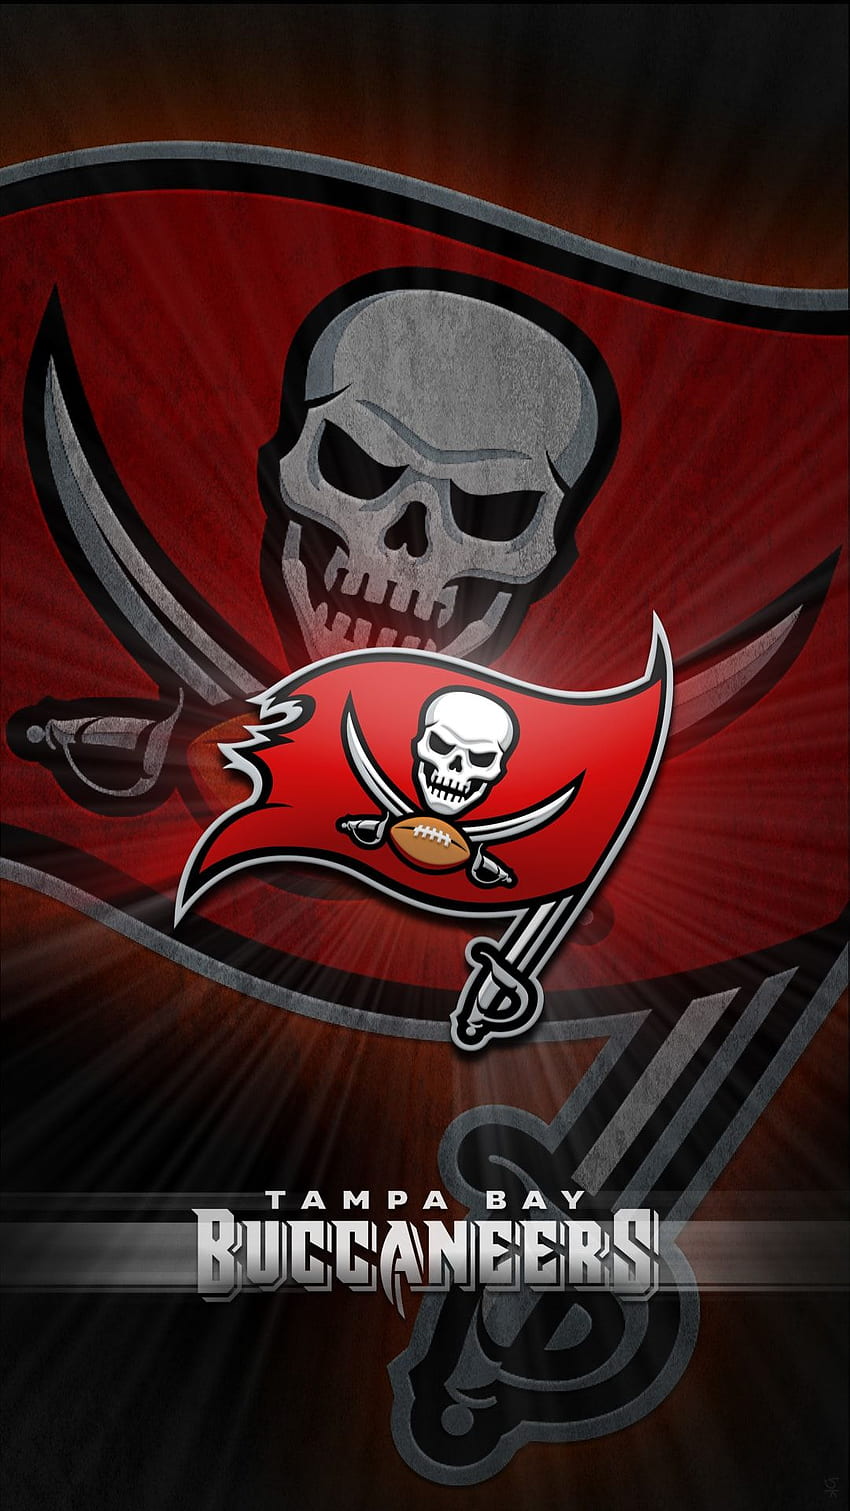 Show your support for the Tampa Bay Buccaneers on social media